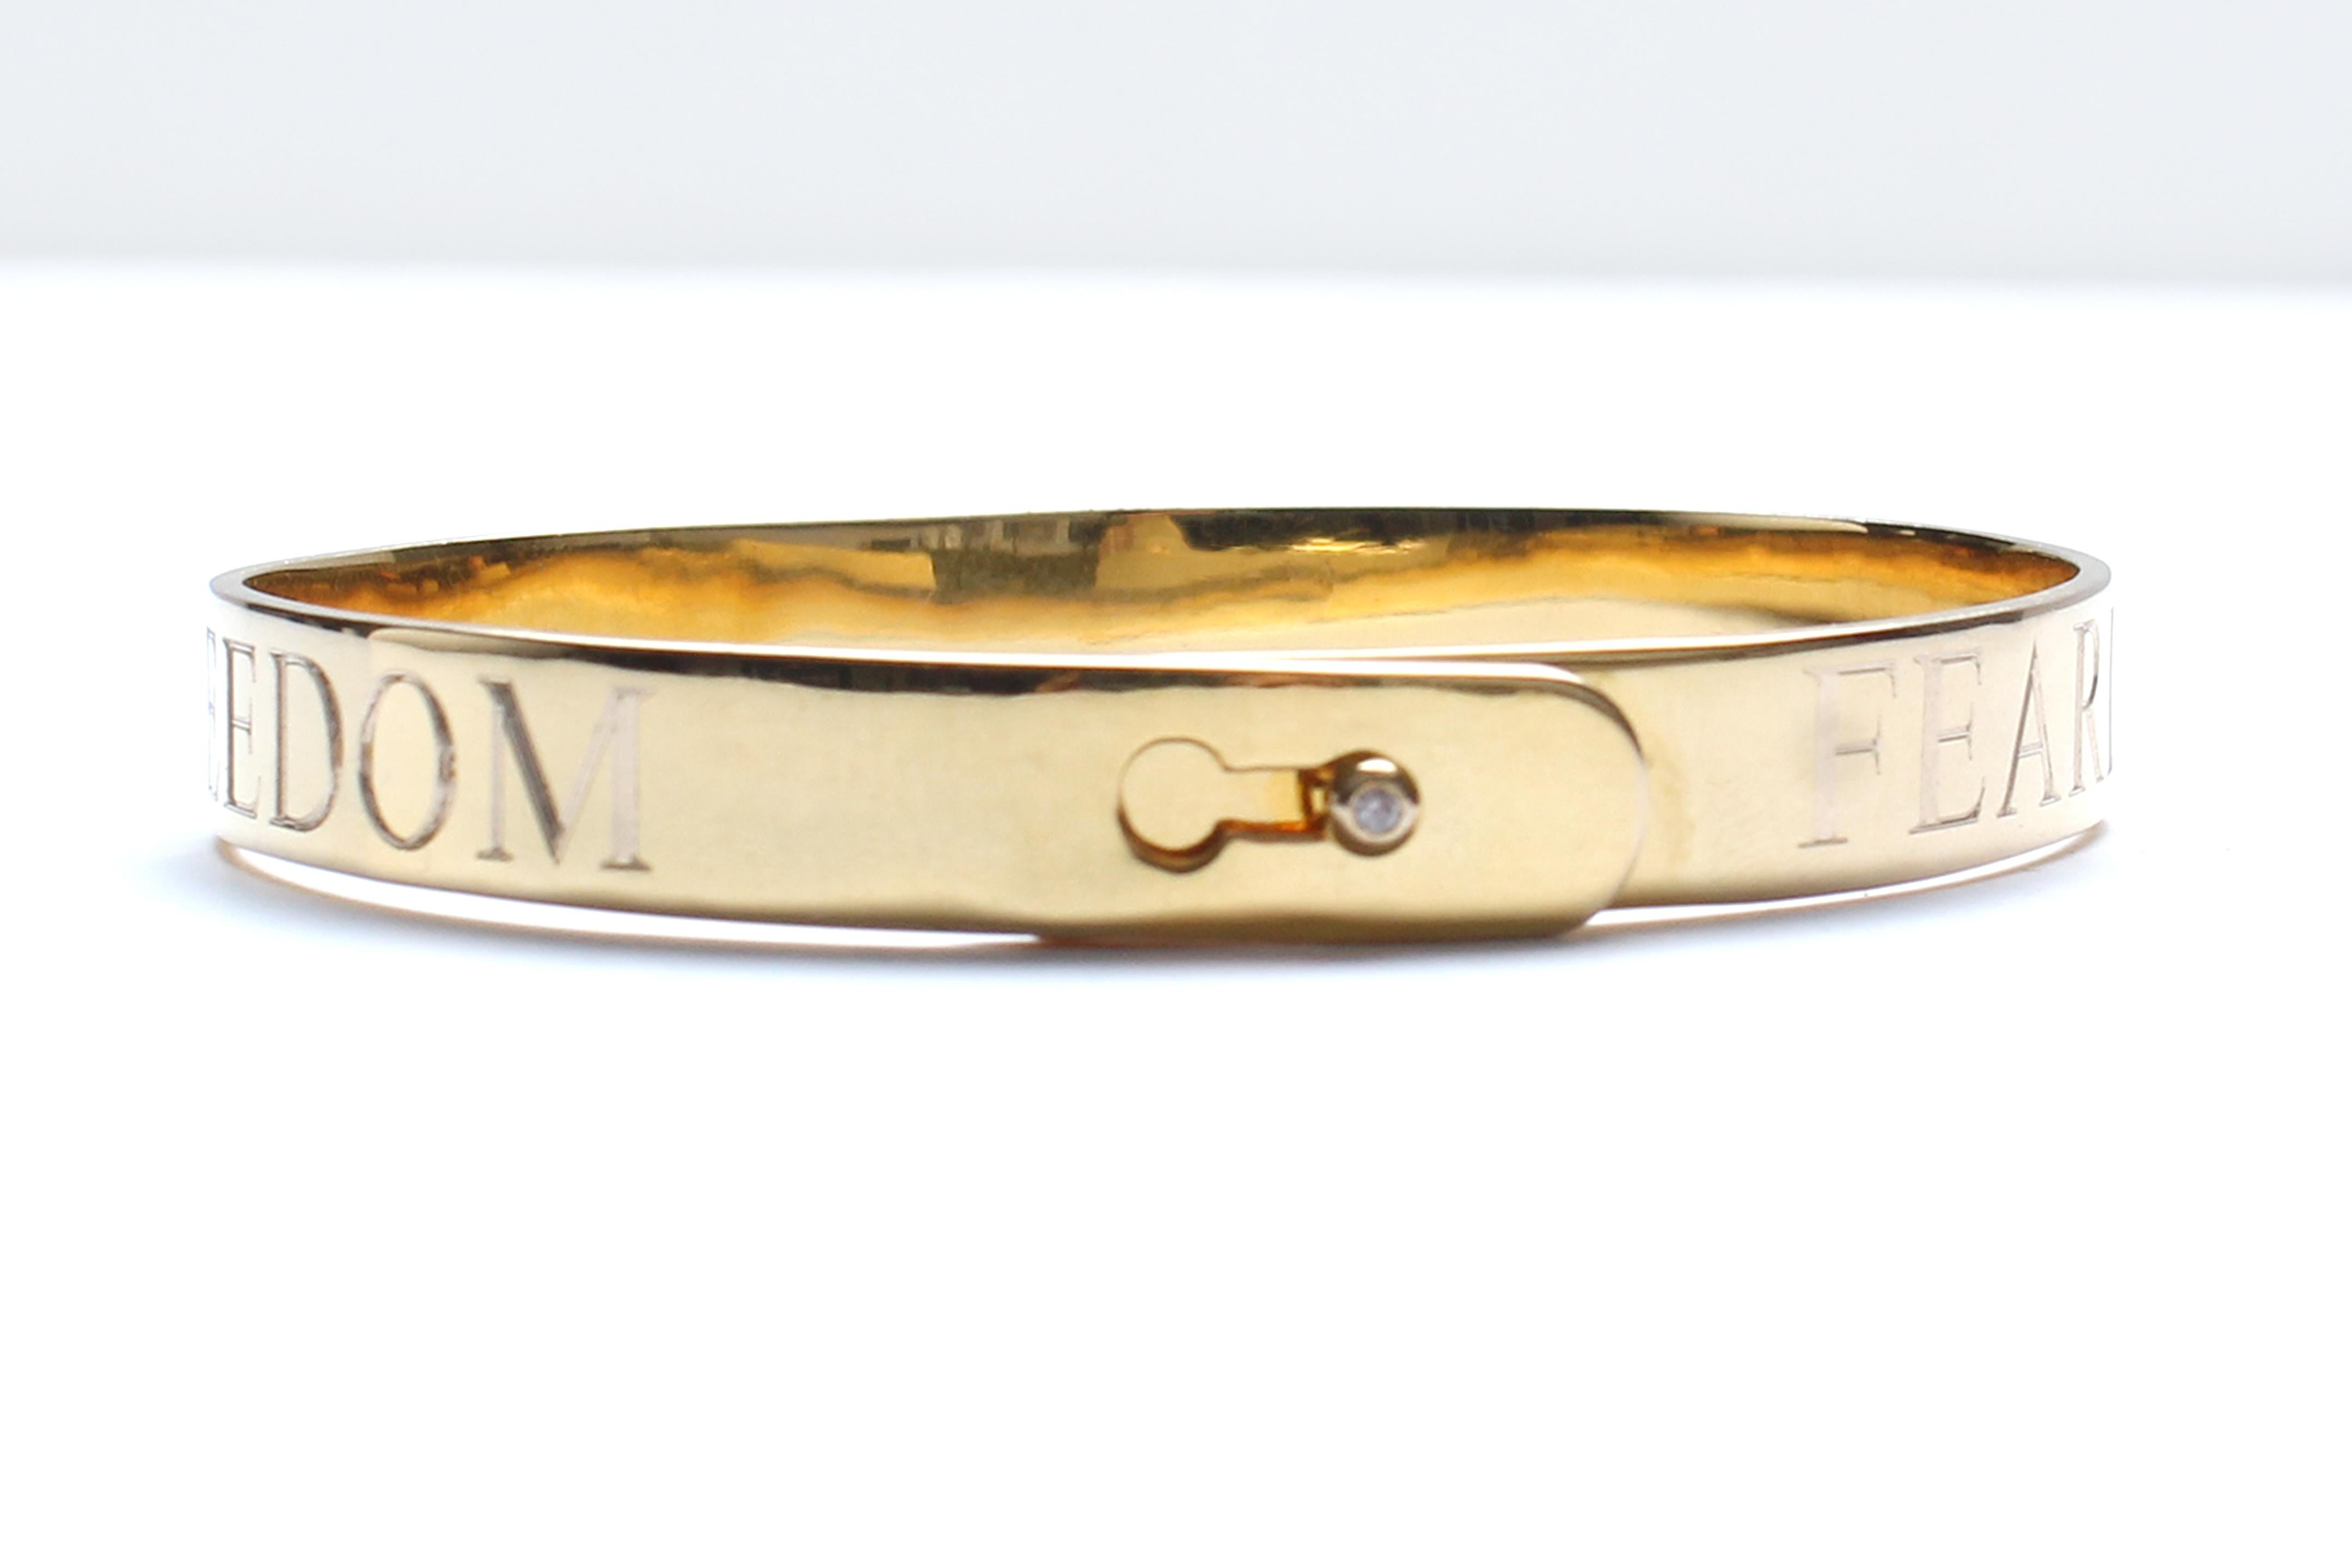 Perfect gift for the one you love!

14k gold, diamond bangle. 

Dimensions:
2 2/4